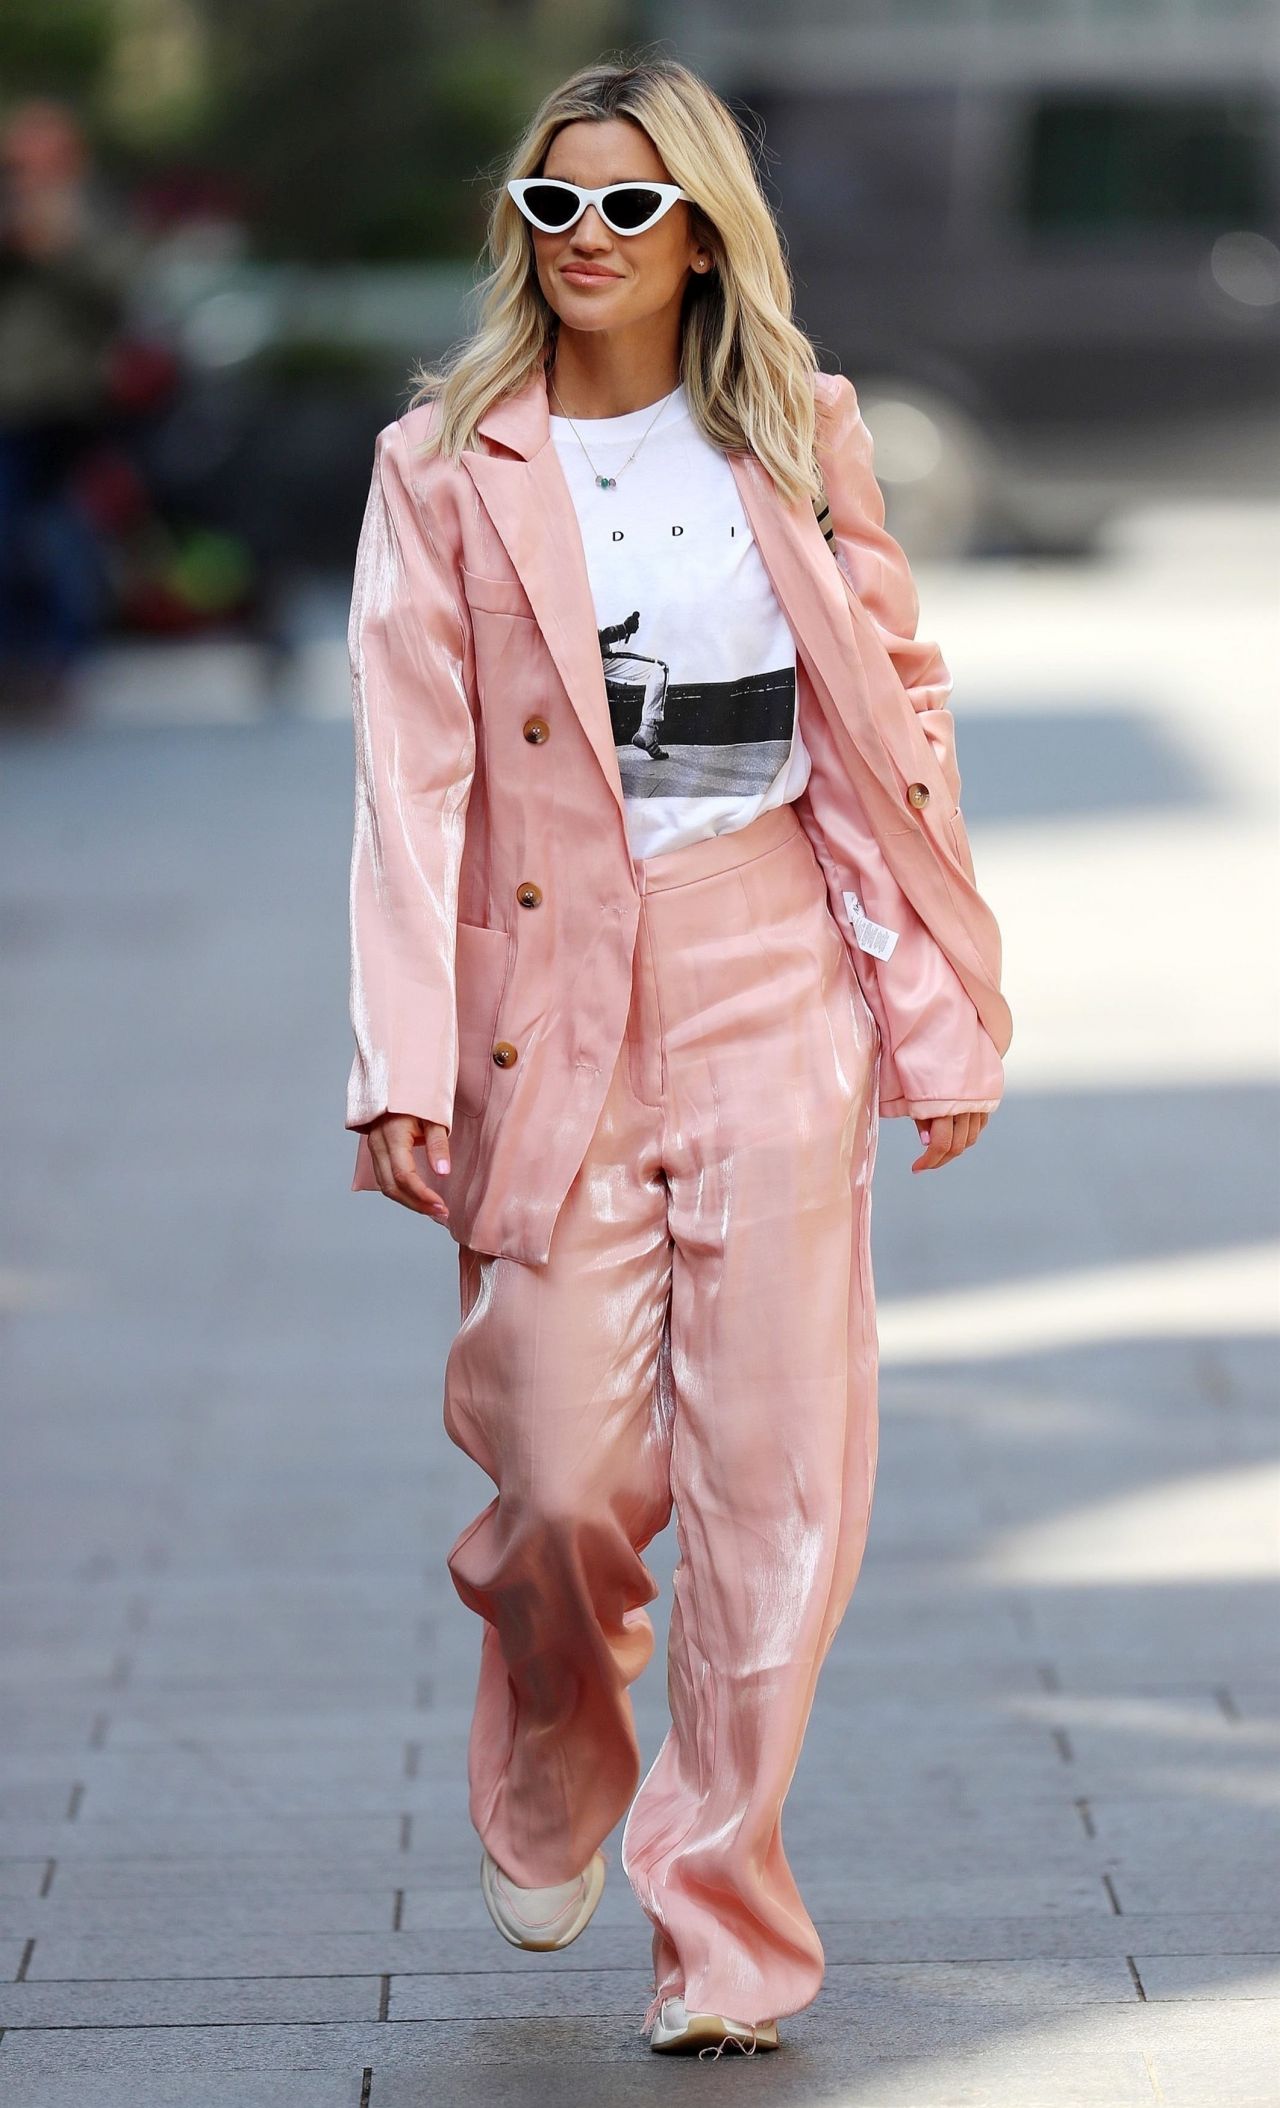 Ashley Roberts in Pink 'Rock 'n Roll Vibe' Suit - London 04/23/2020 ...